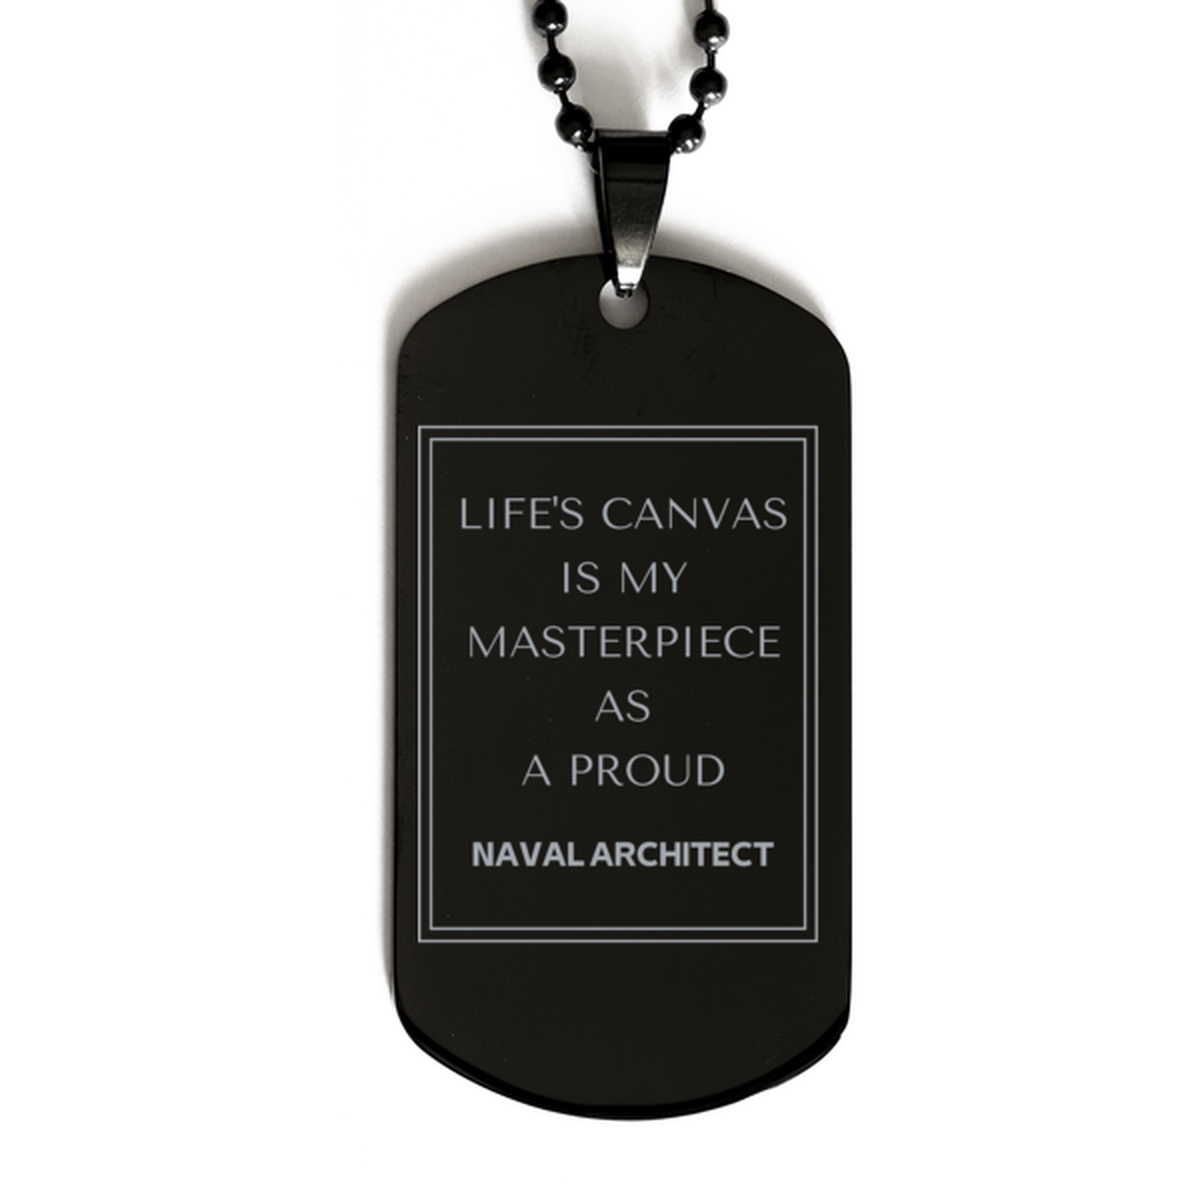 Proud Naval Architect Gifts, Life's canvas is my masterpiece, Epic Birthday Christmas Unique Black Dog Tag For Naval Architect, Coworkers, Men, Women, Friends